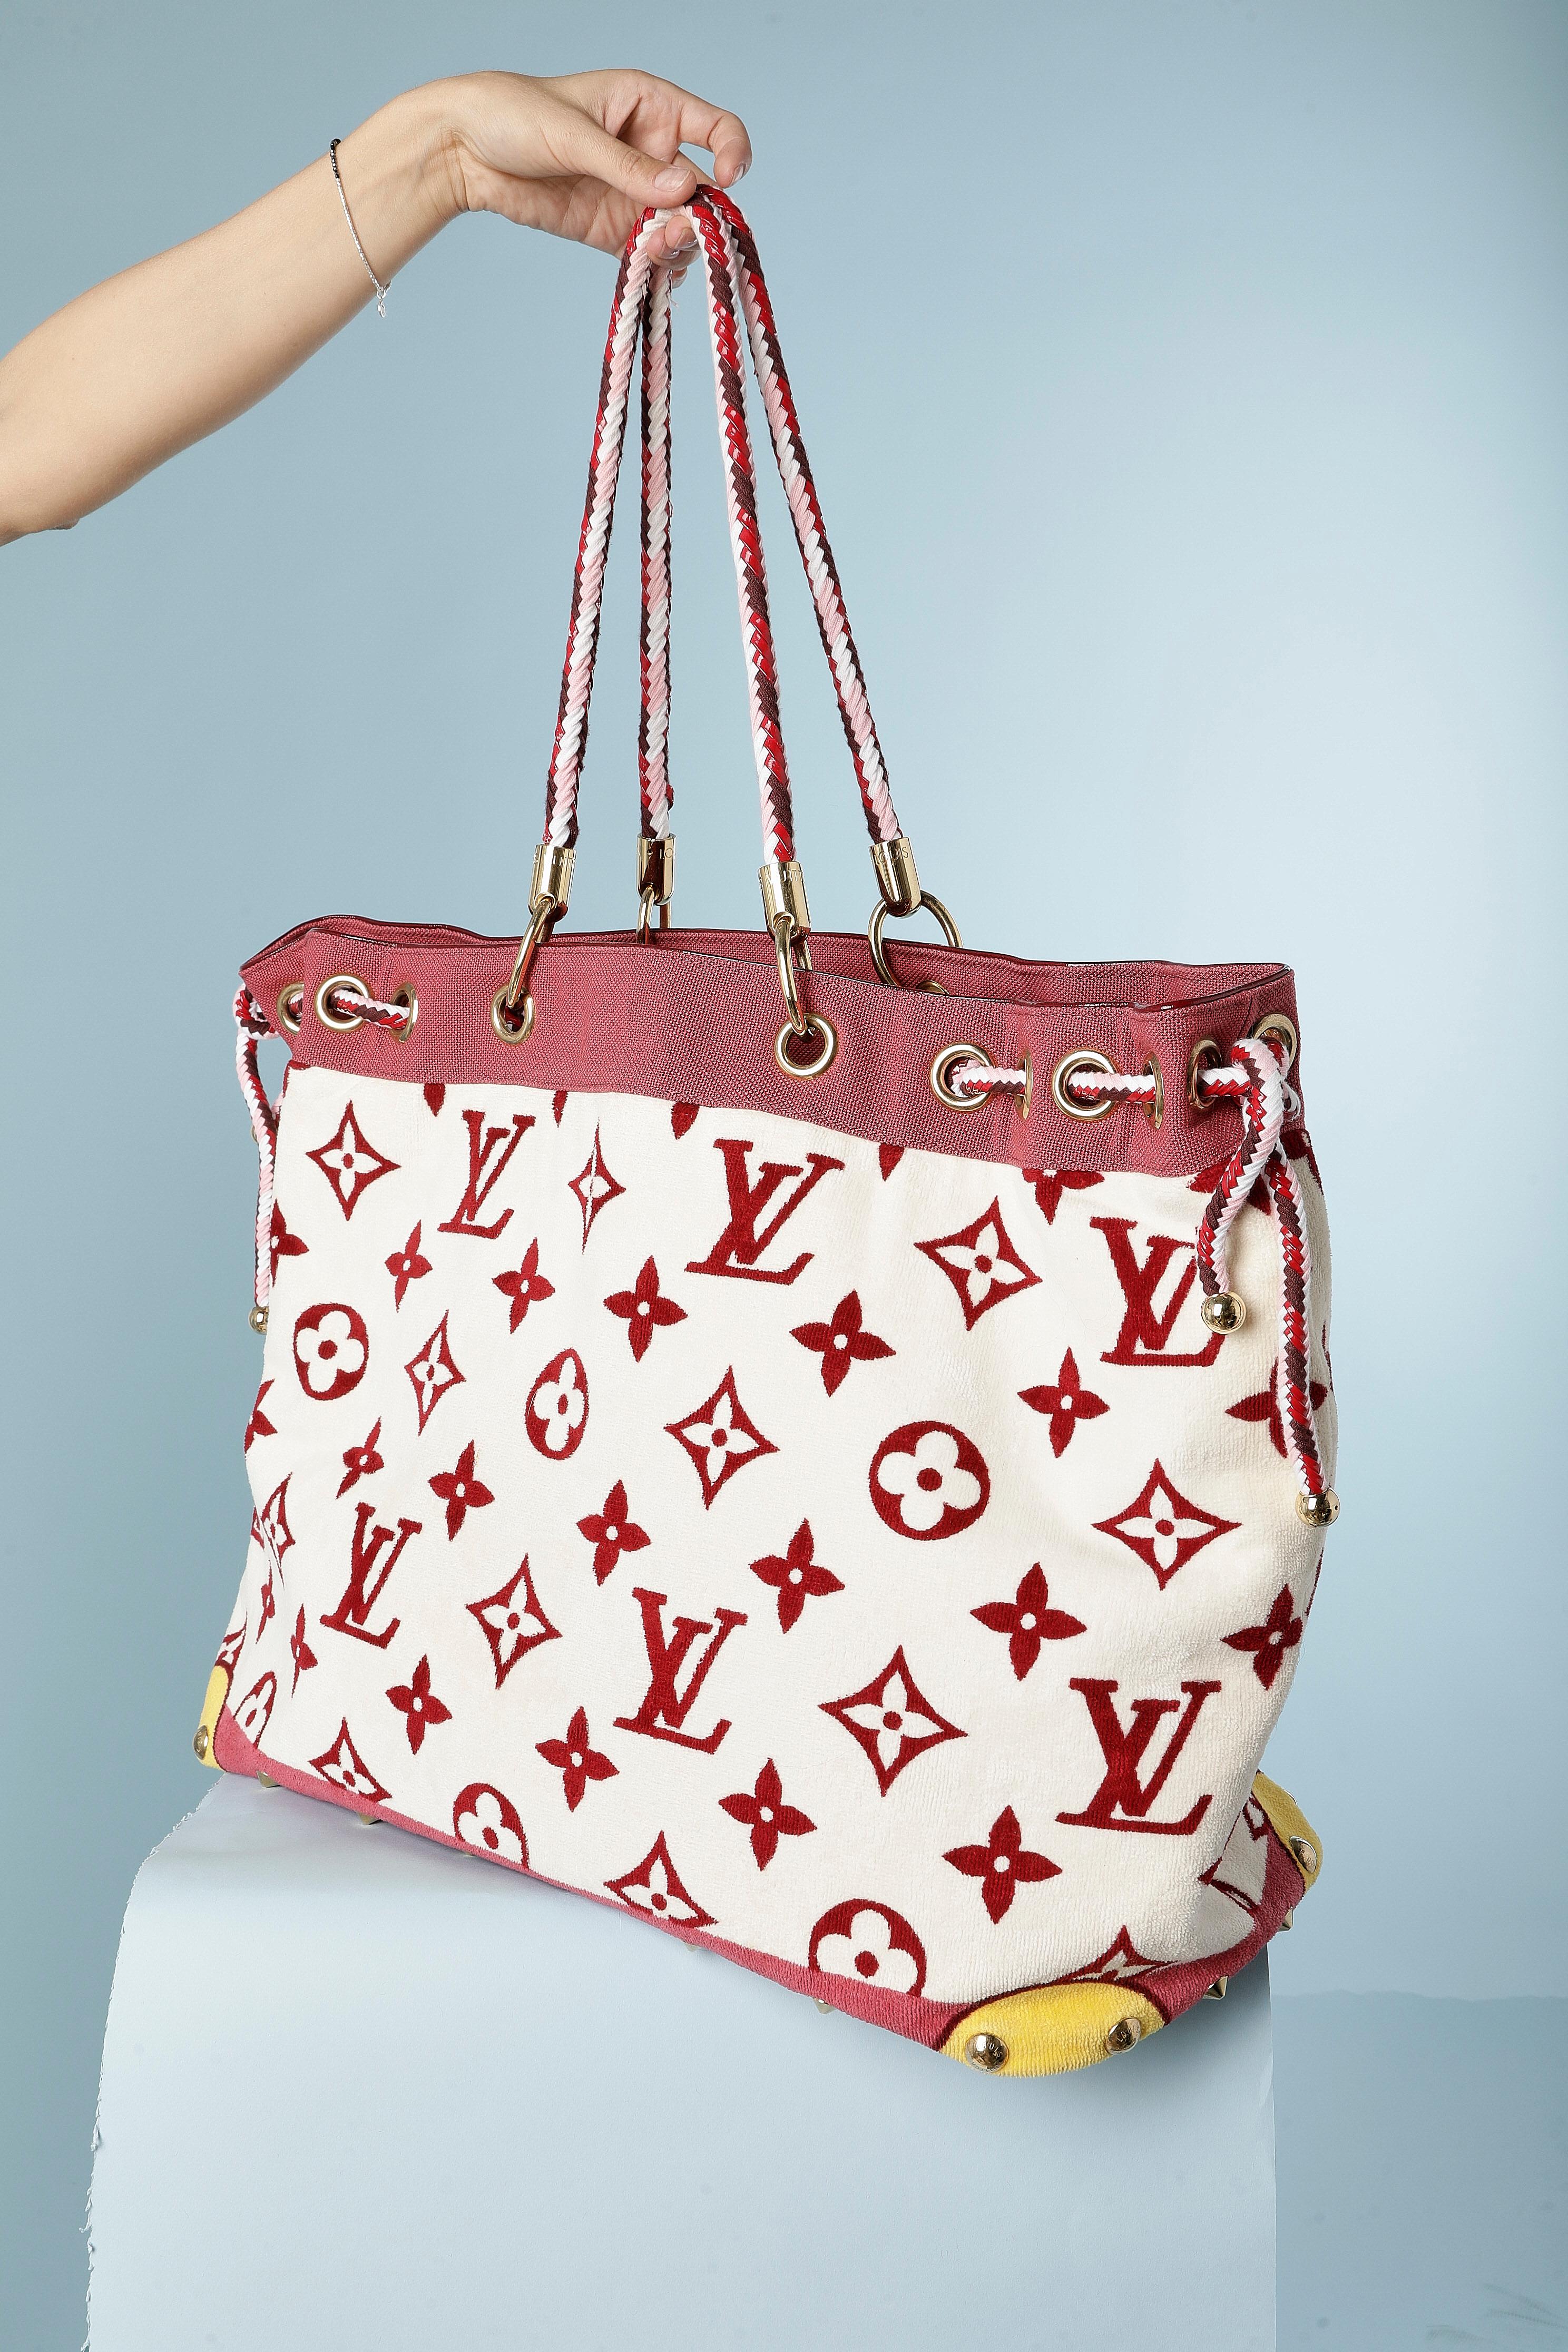 Louis Vuitton Beach Bags - 8 For Sale on 1stDibs